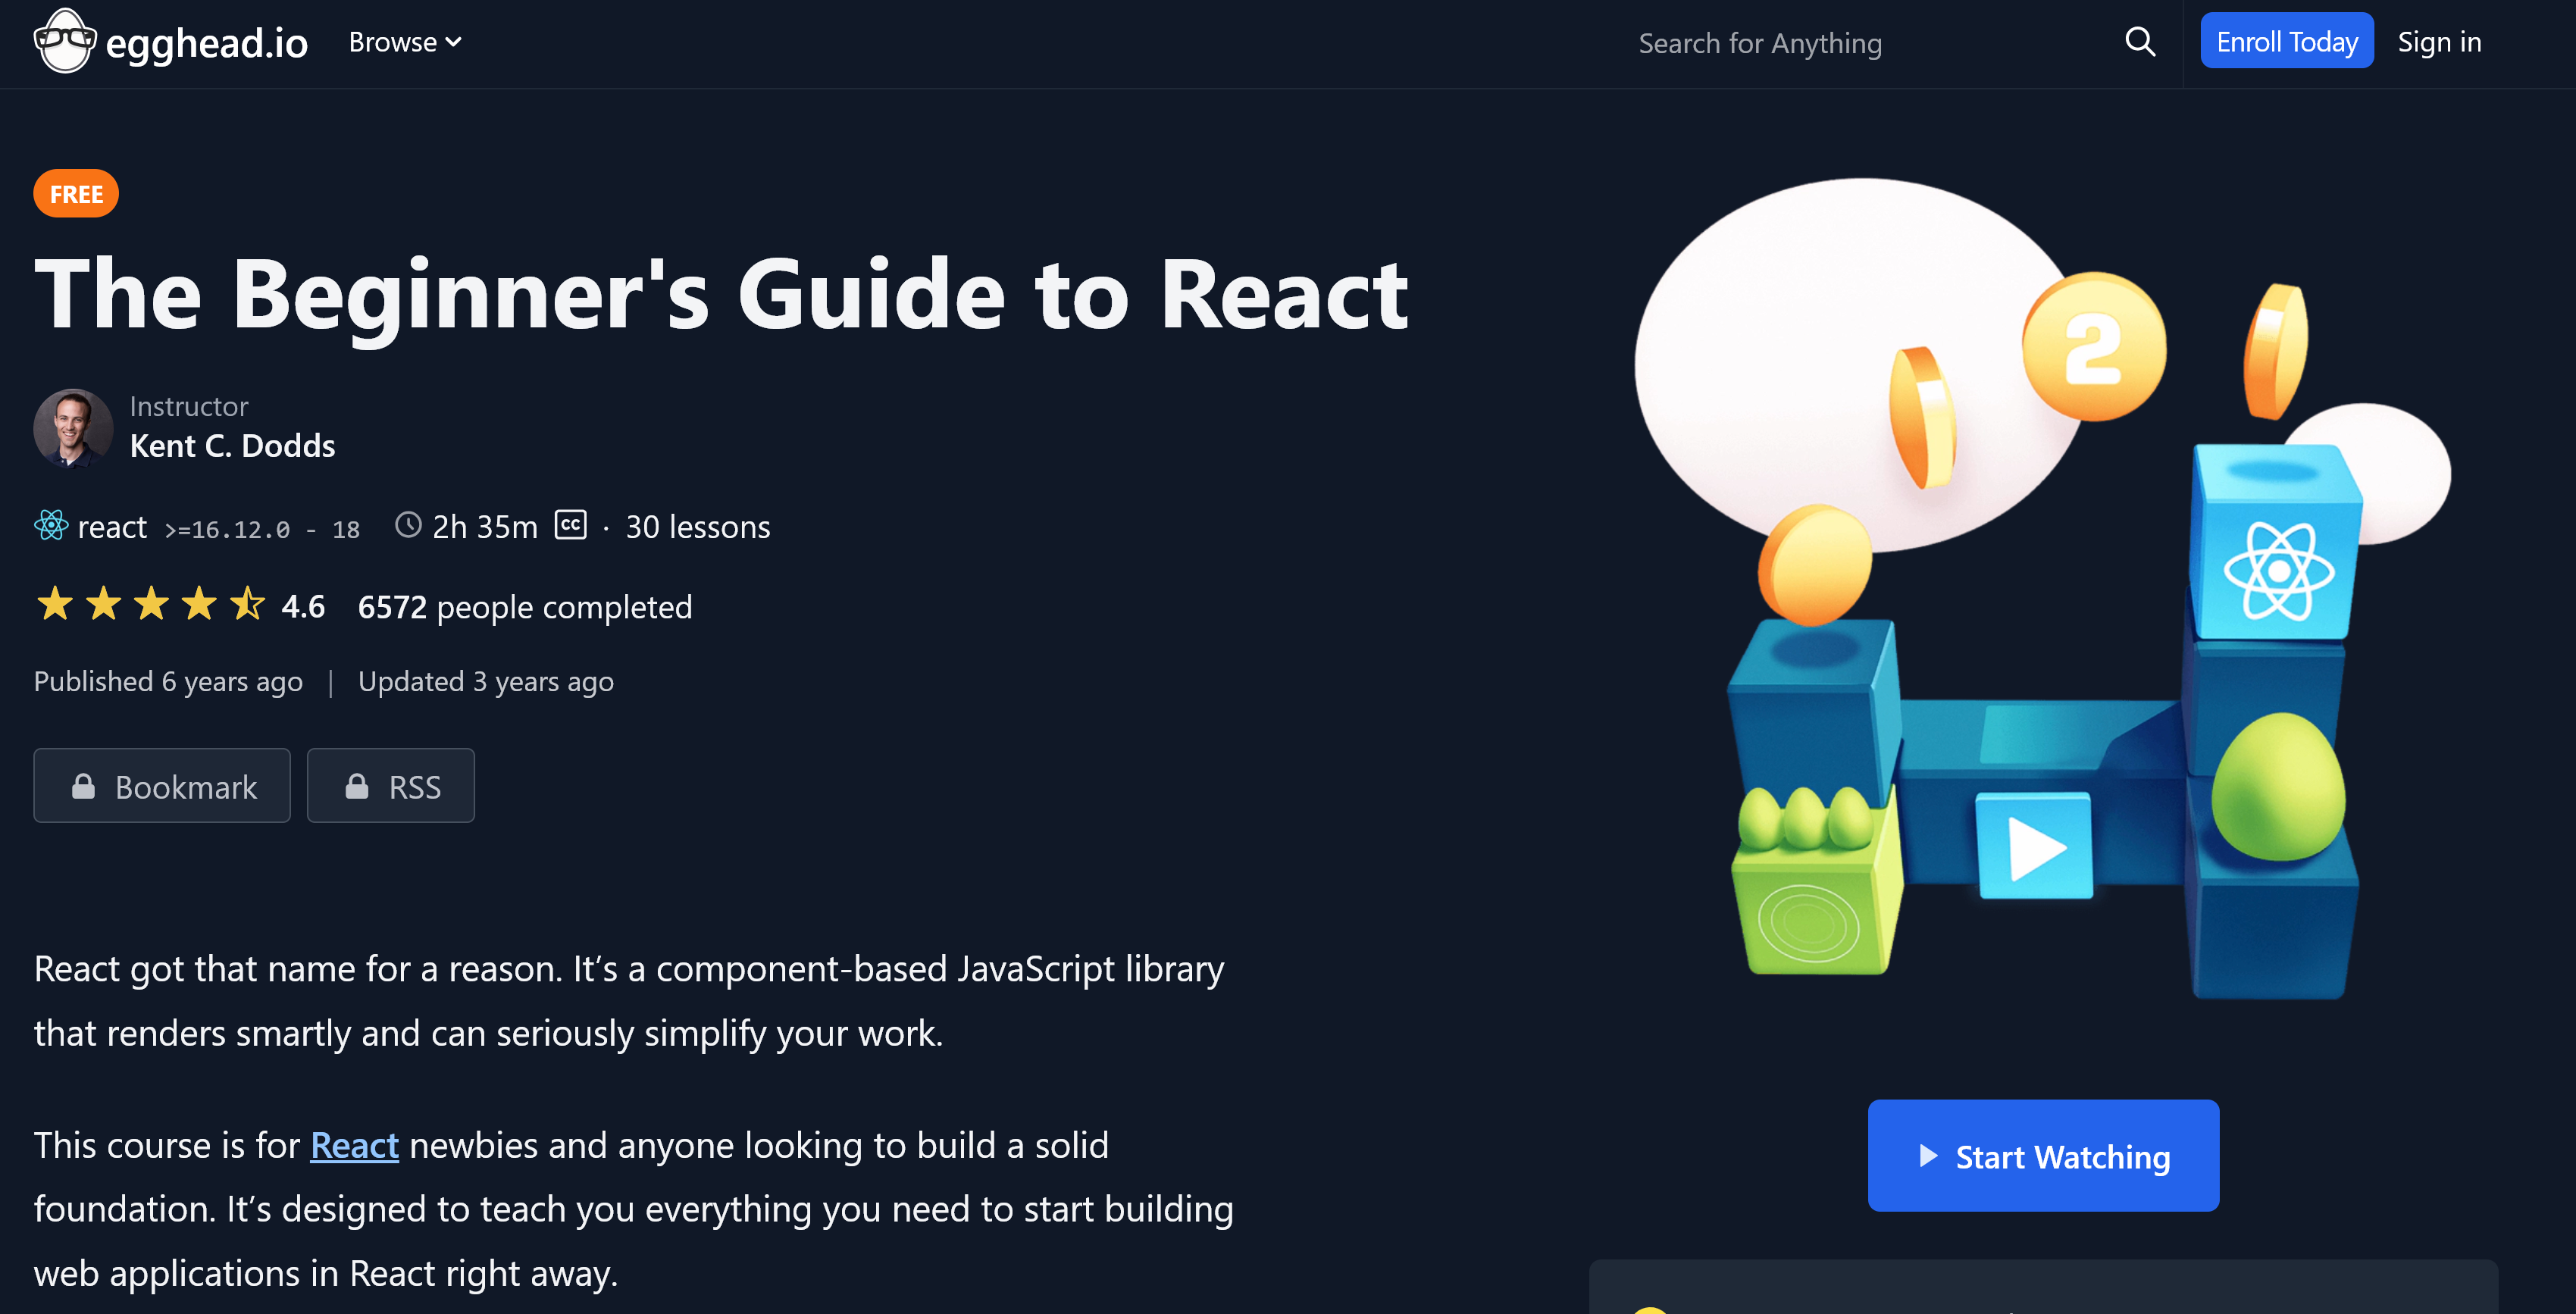 The Beginner's Guide to React course by Kent C Dodds